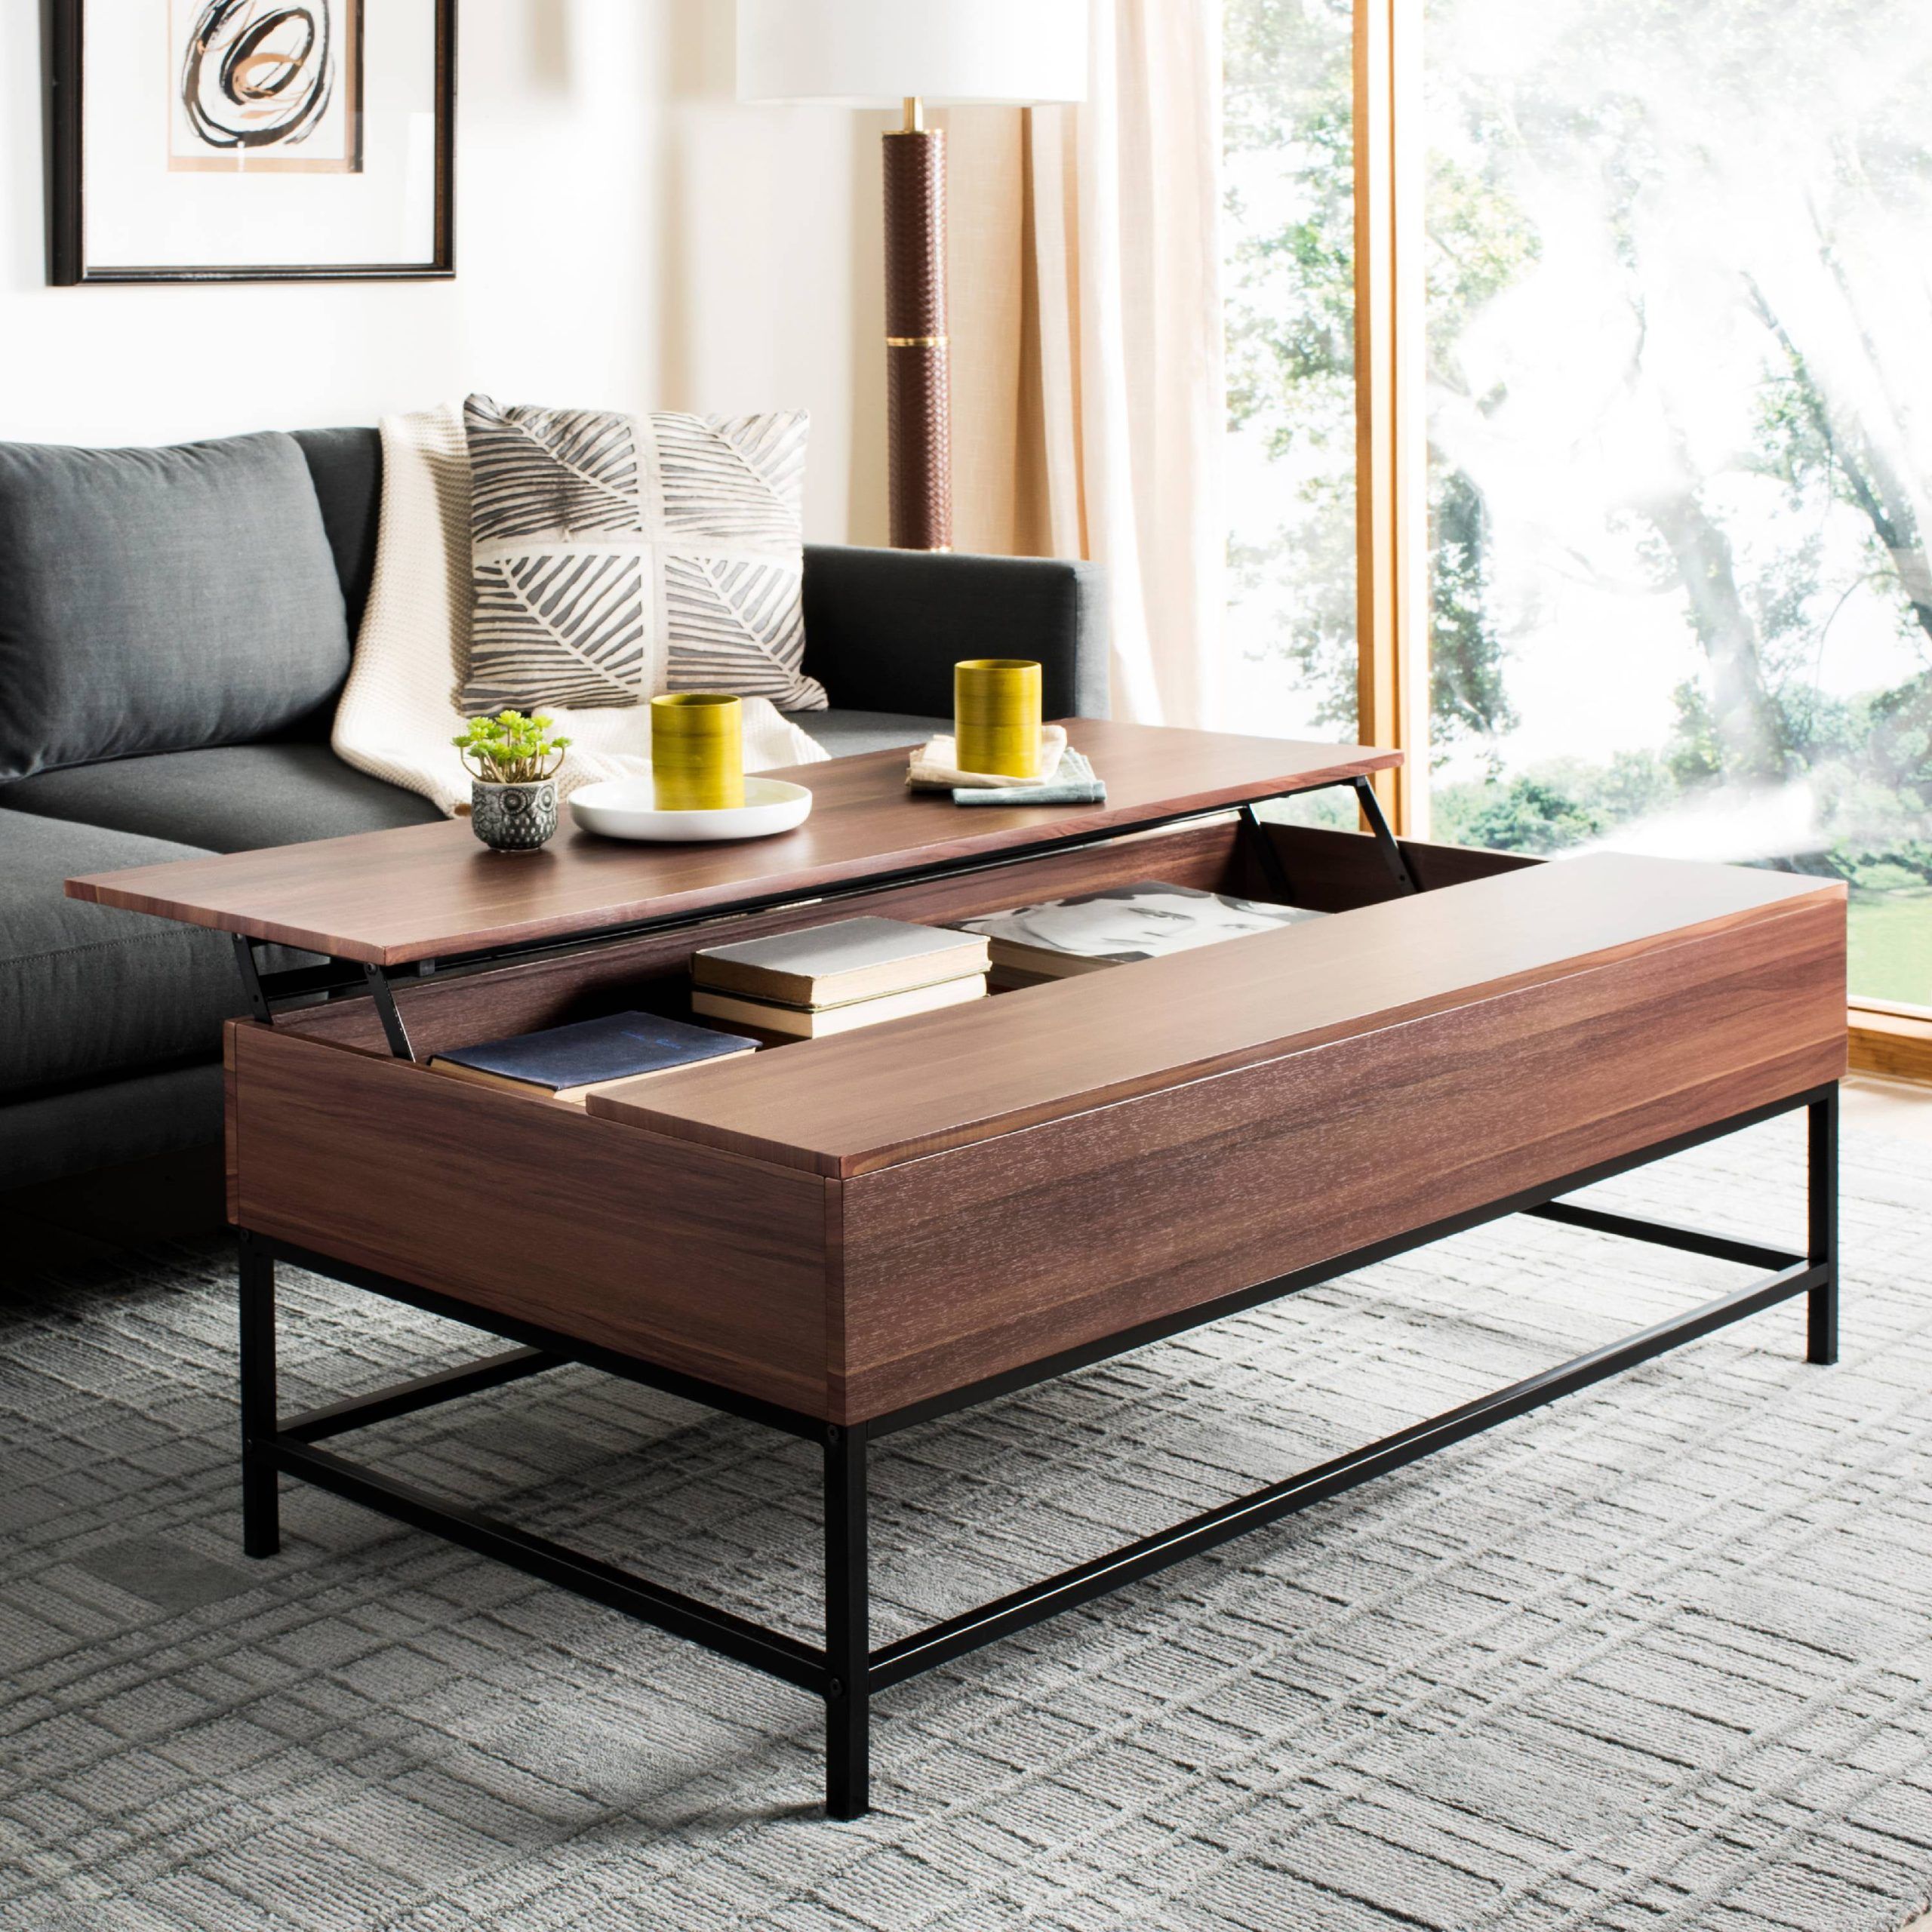 Safavieh Gina Contemporary Lift Top Coffee Table With Storage – Walmart In Lift Top Coffee Tables With Shelves (Gallery 7 of 20)